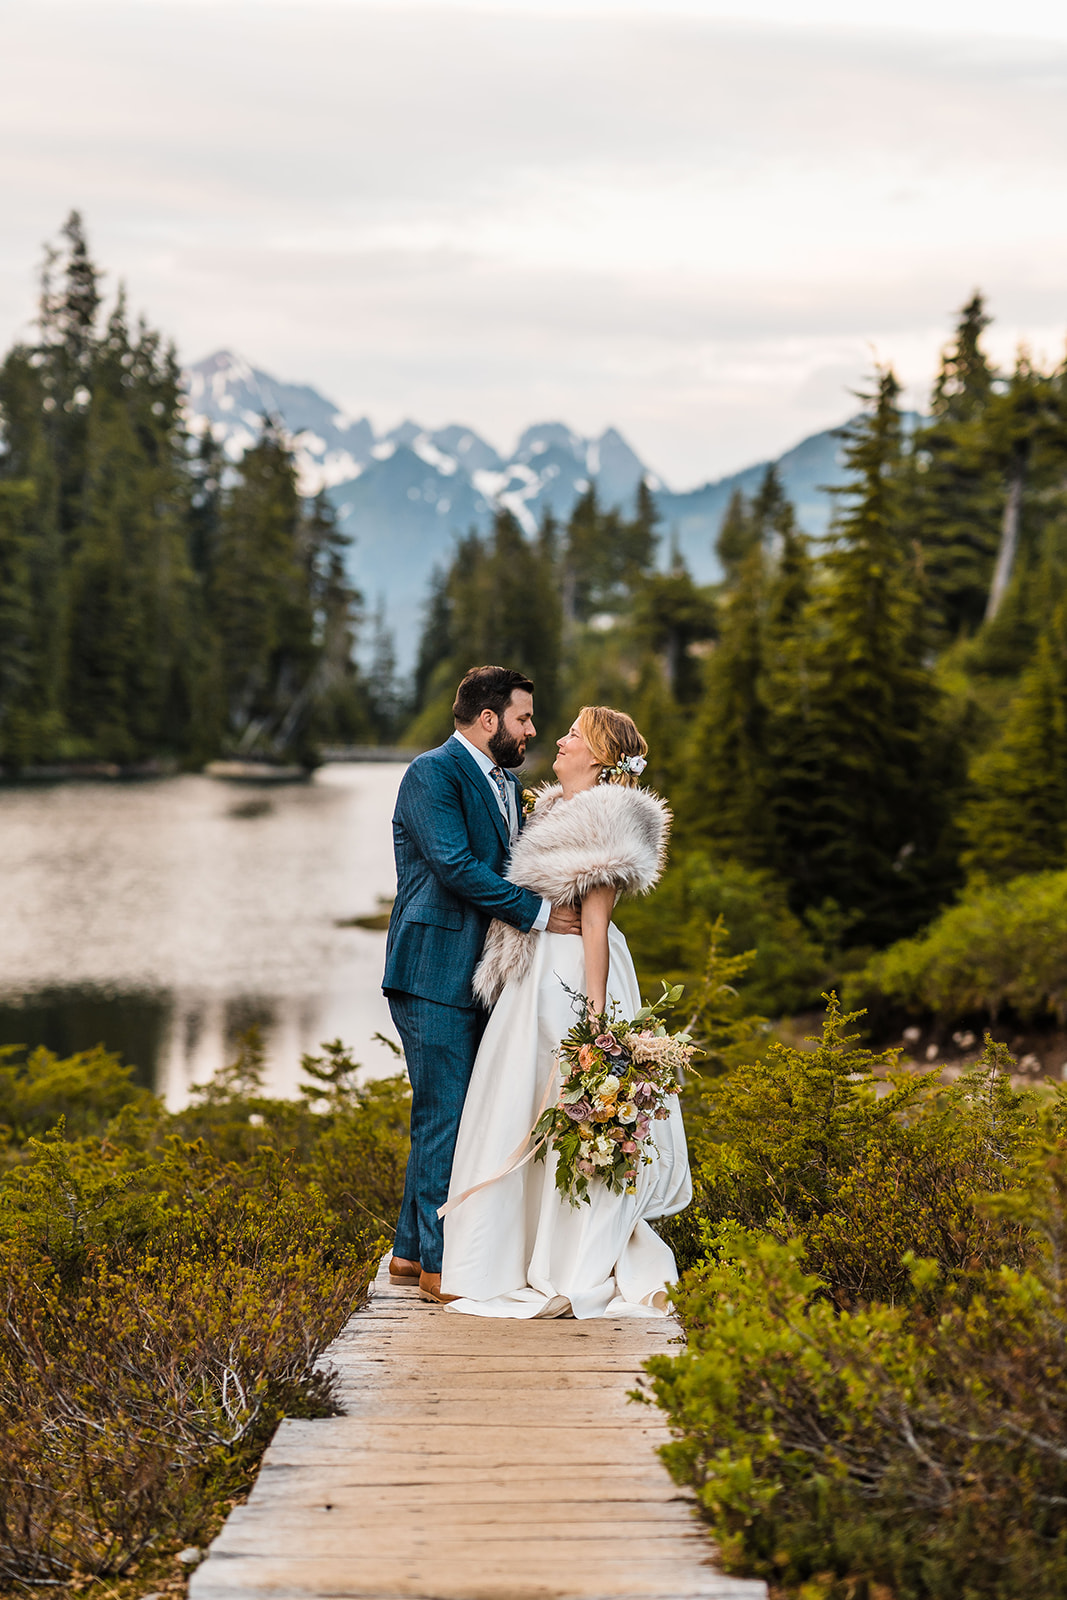 Elopements, small weddings, and microweddings - our free guide makes COVID planning easier! covid wedding covid-19 wedding seattle elopement micro wedding microwedding